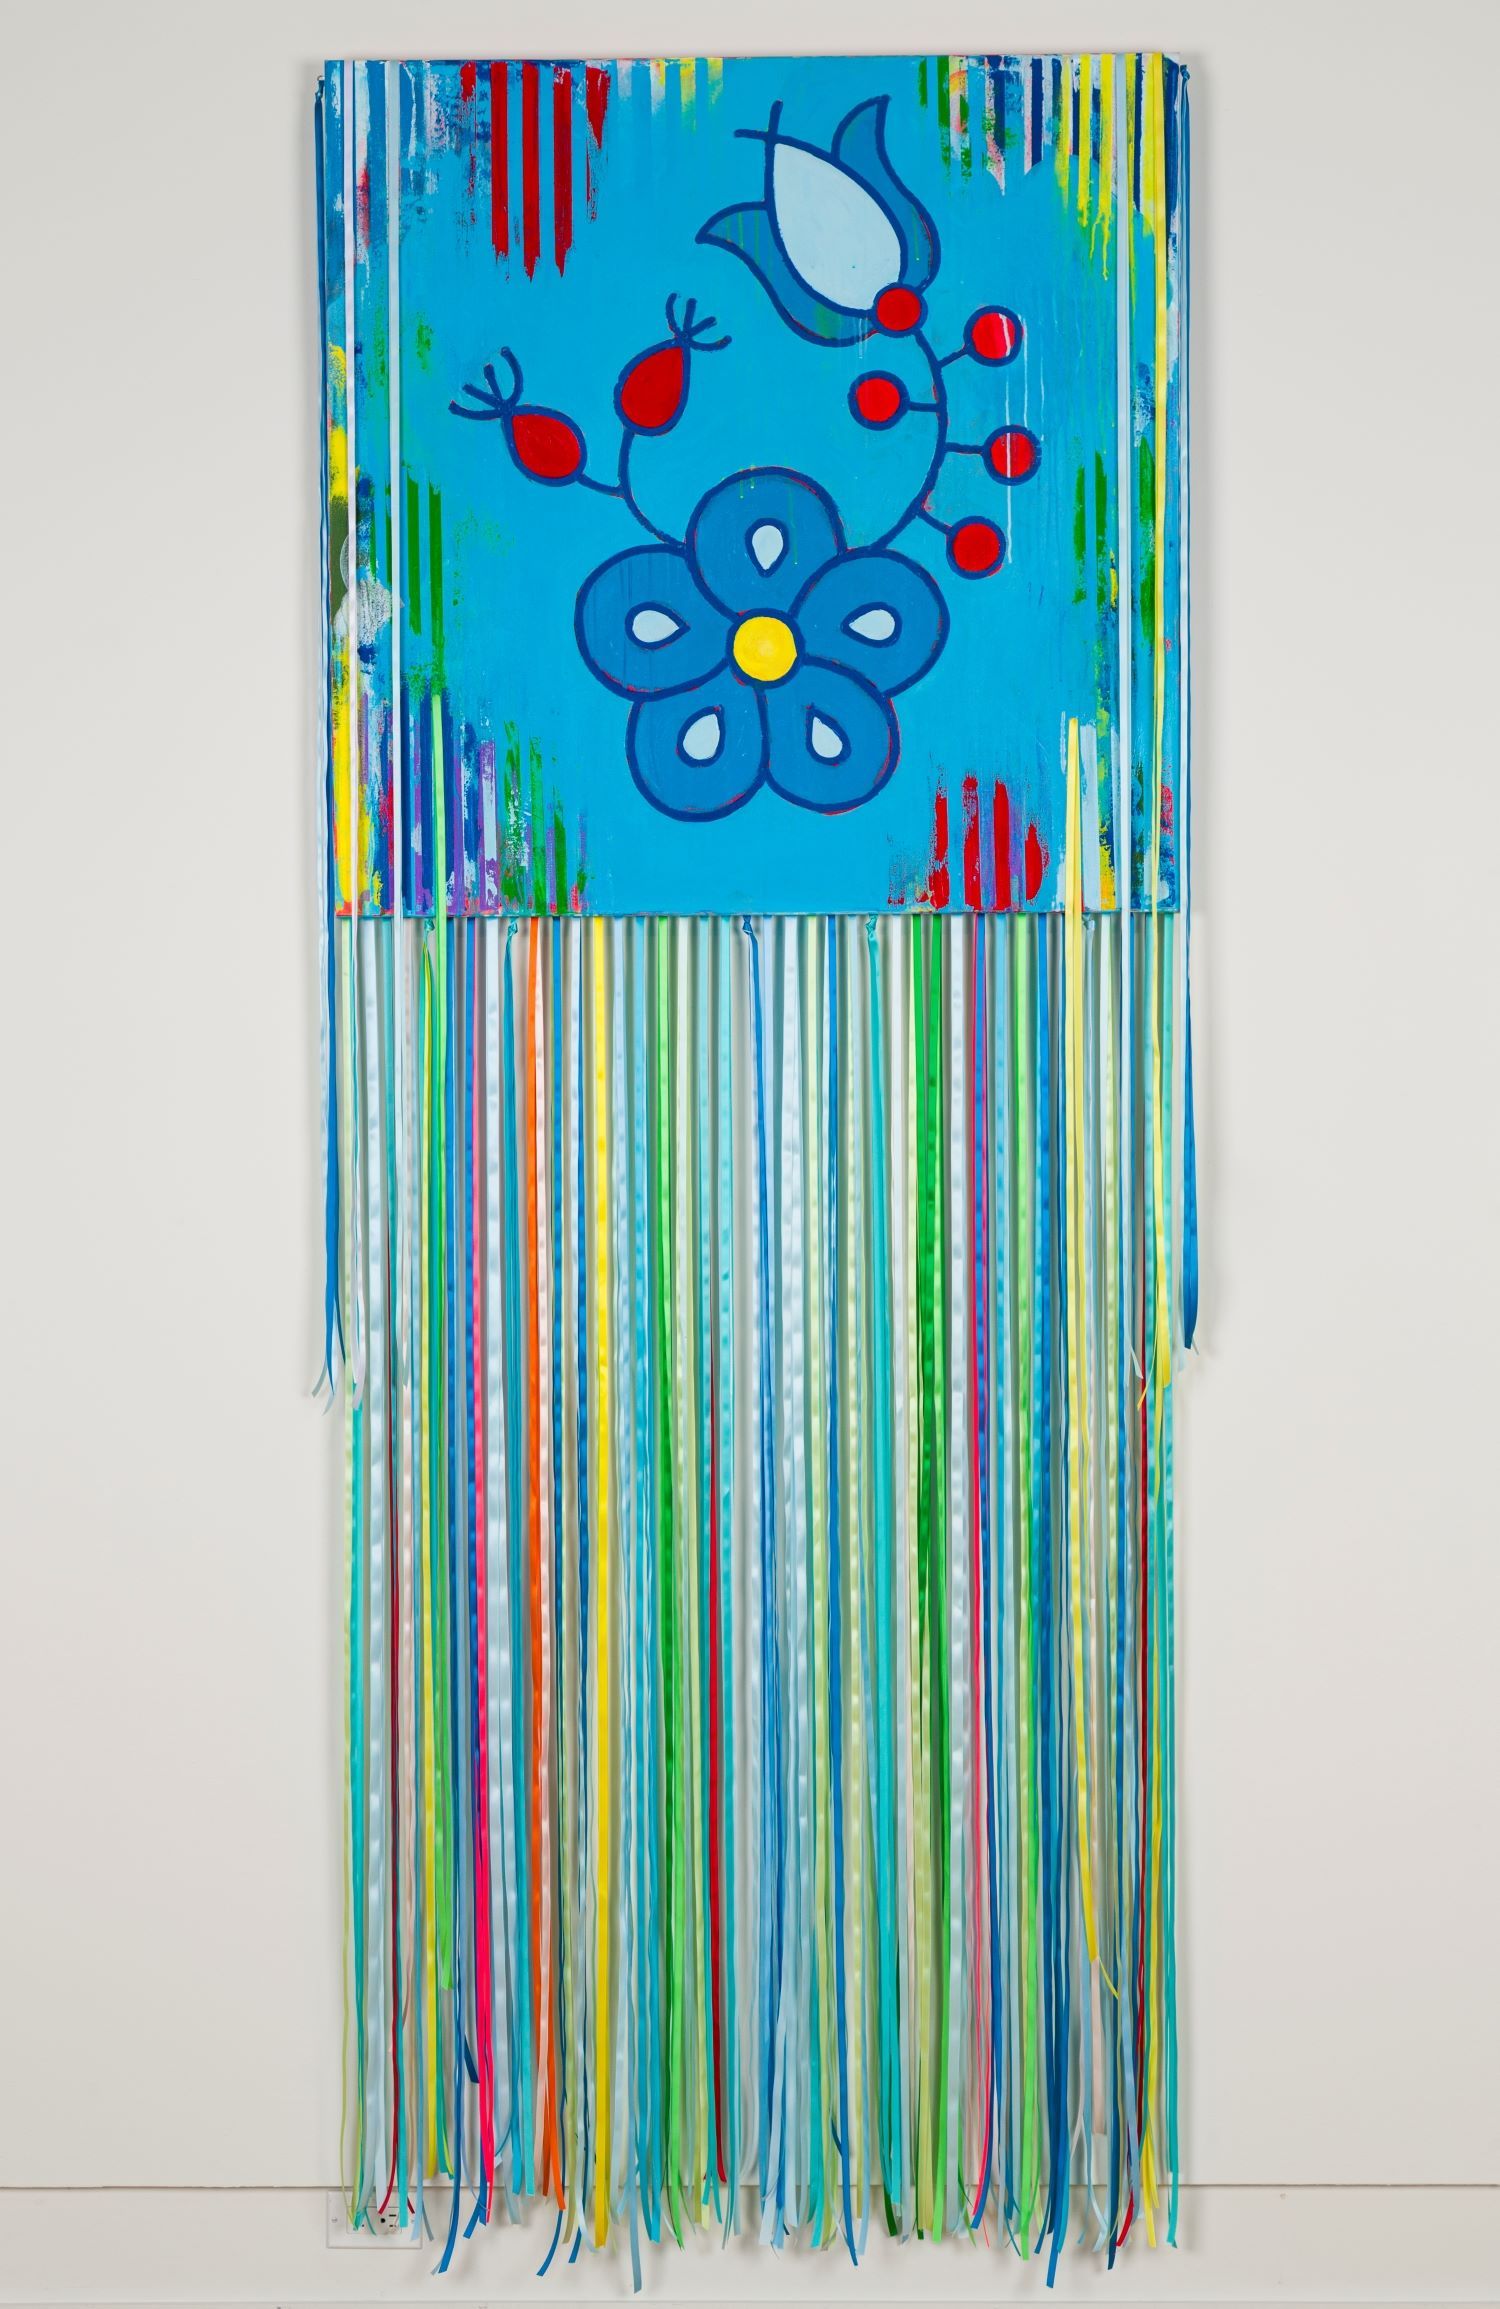 Painting of a flower on a blue background with vertical stripes. Long, multi-coloured ribbons hang from the bottom.